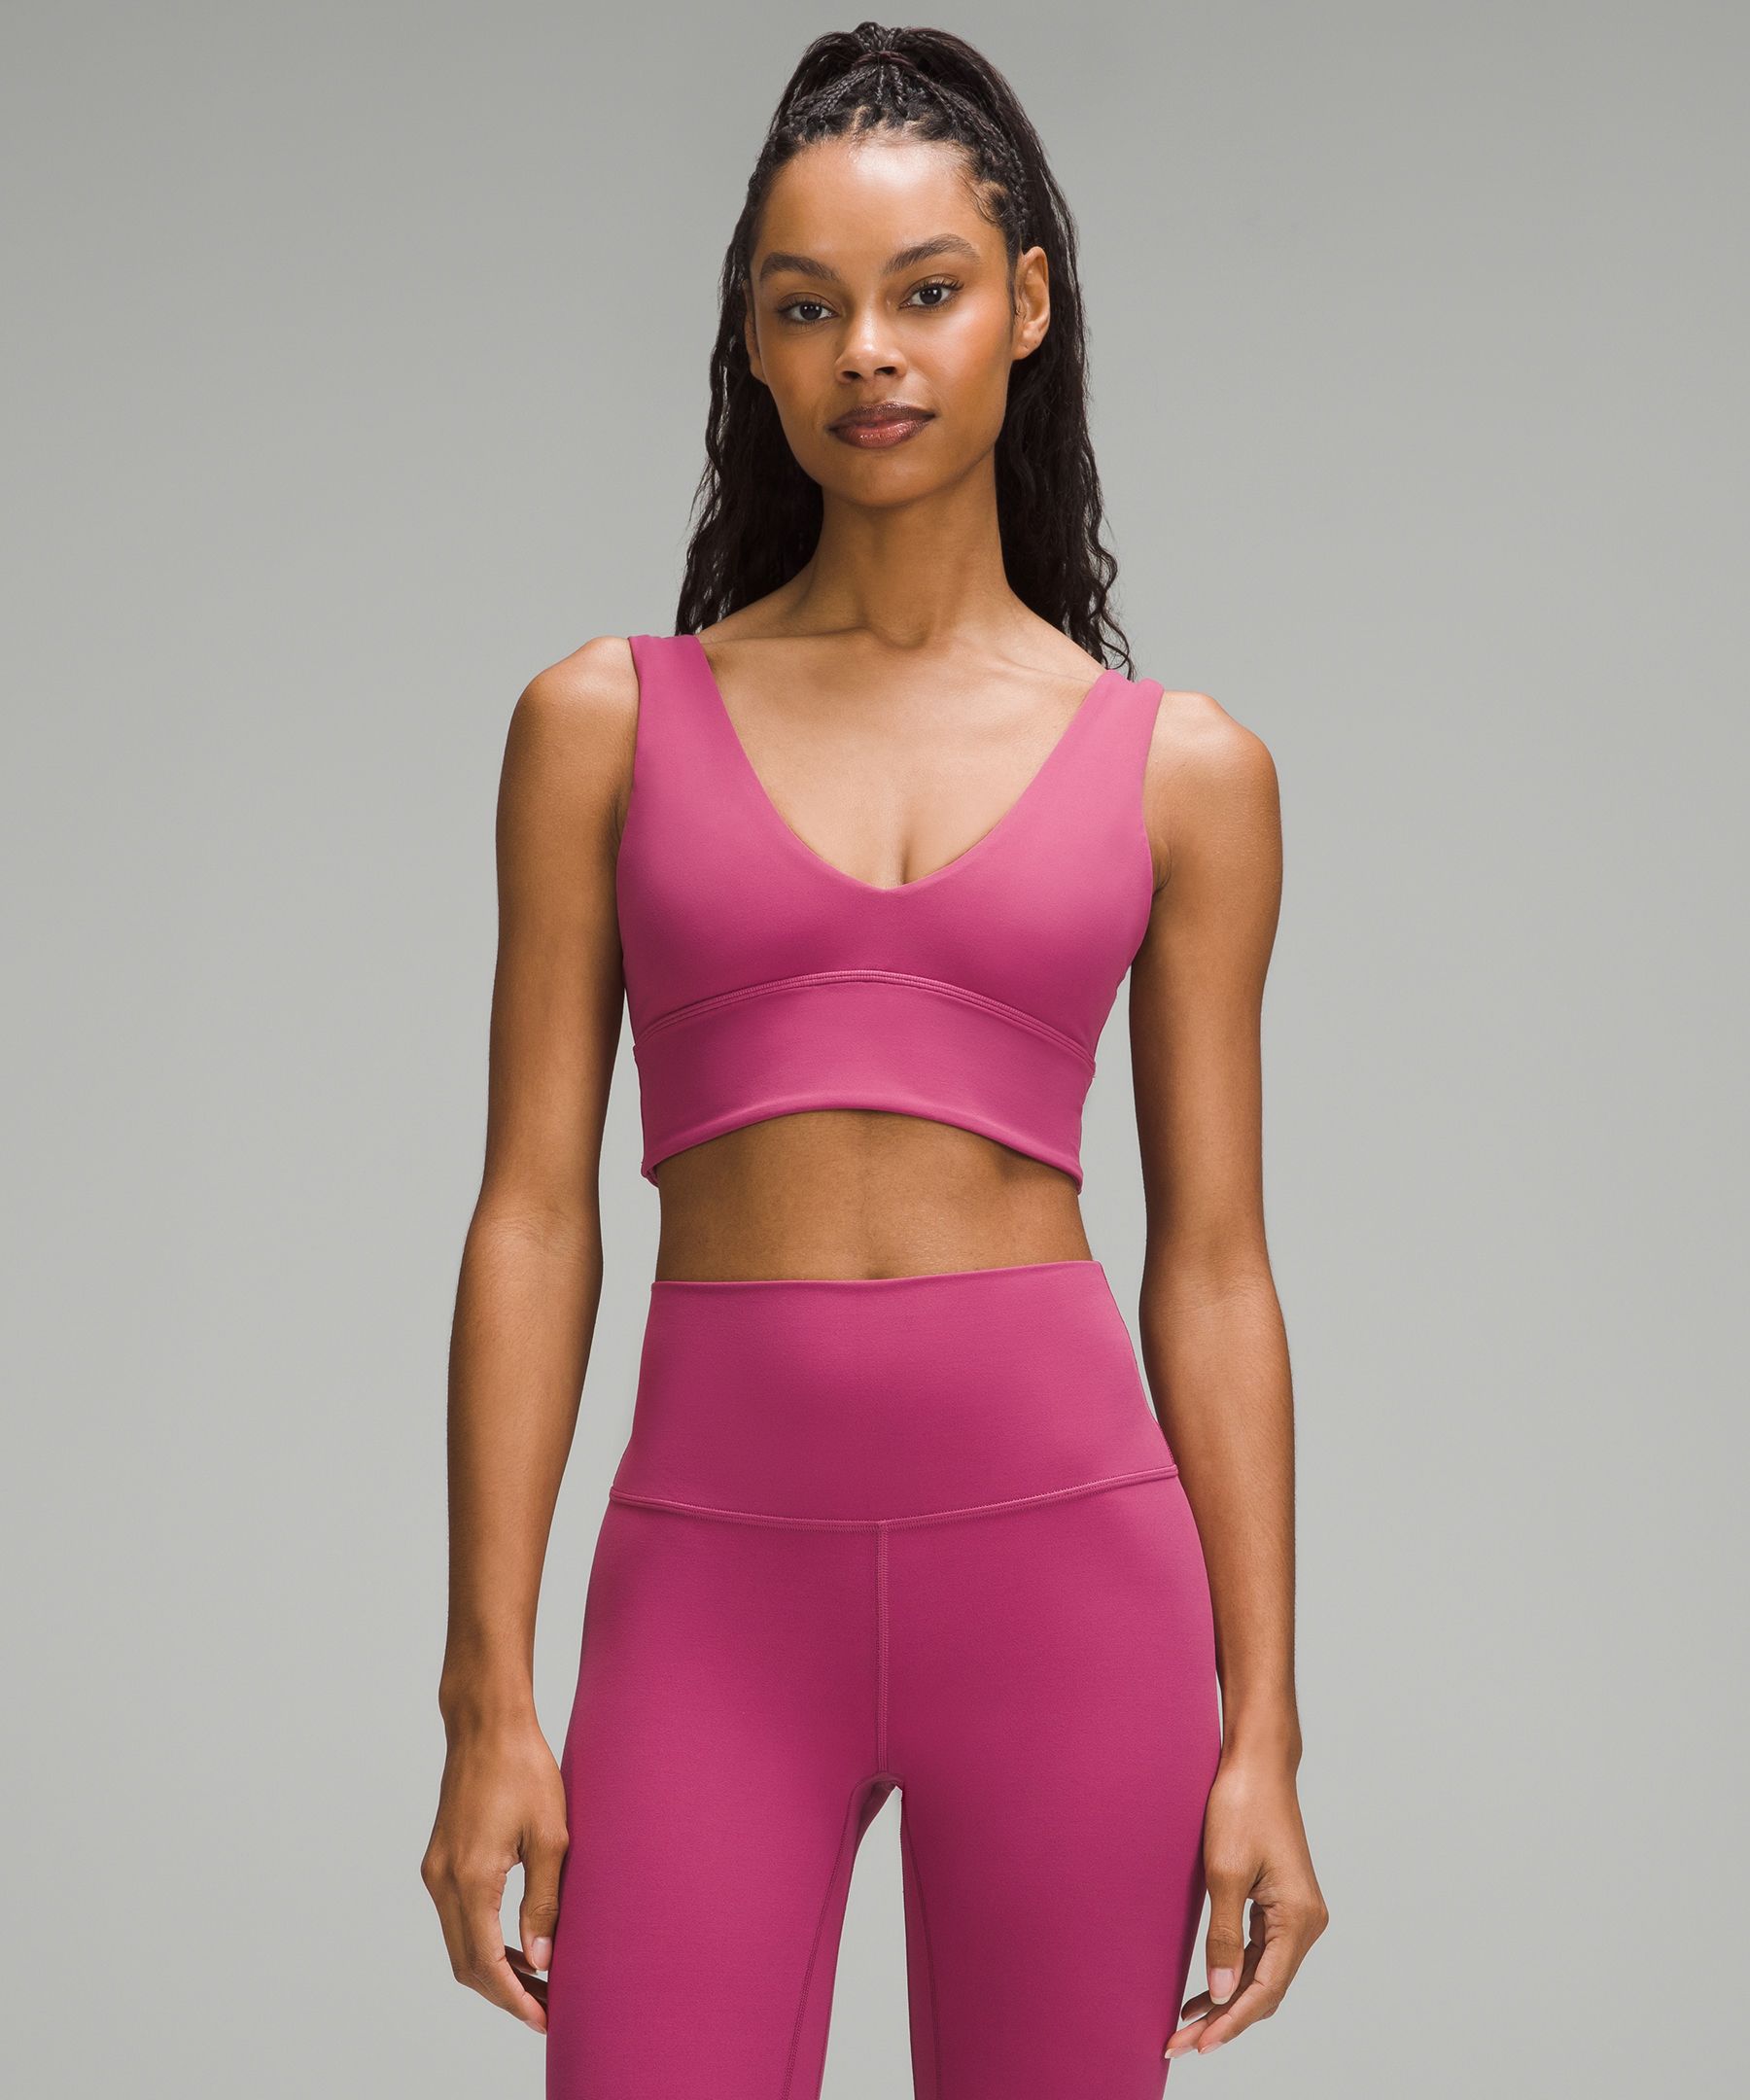 Womens Yoga Align Sports Bra With Double Sided Sanding, Tight Fitting And  Thin Belt, Featuring Beautiful Back And Sling Design Lightweight And  Underweight 327g From Uikta, $34.99